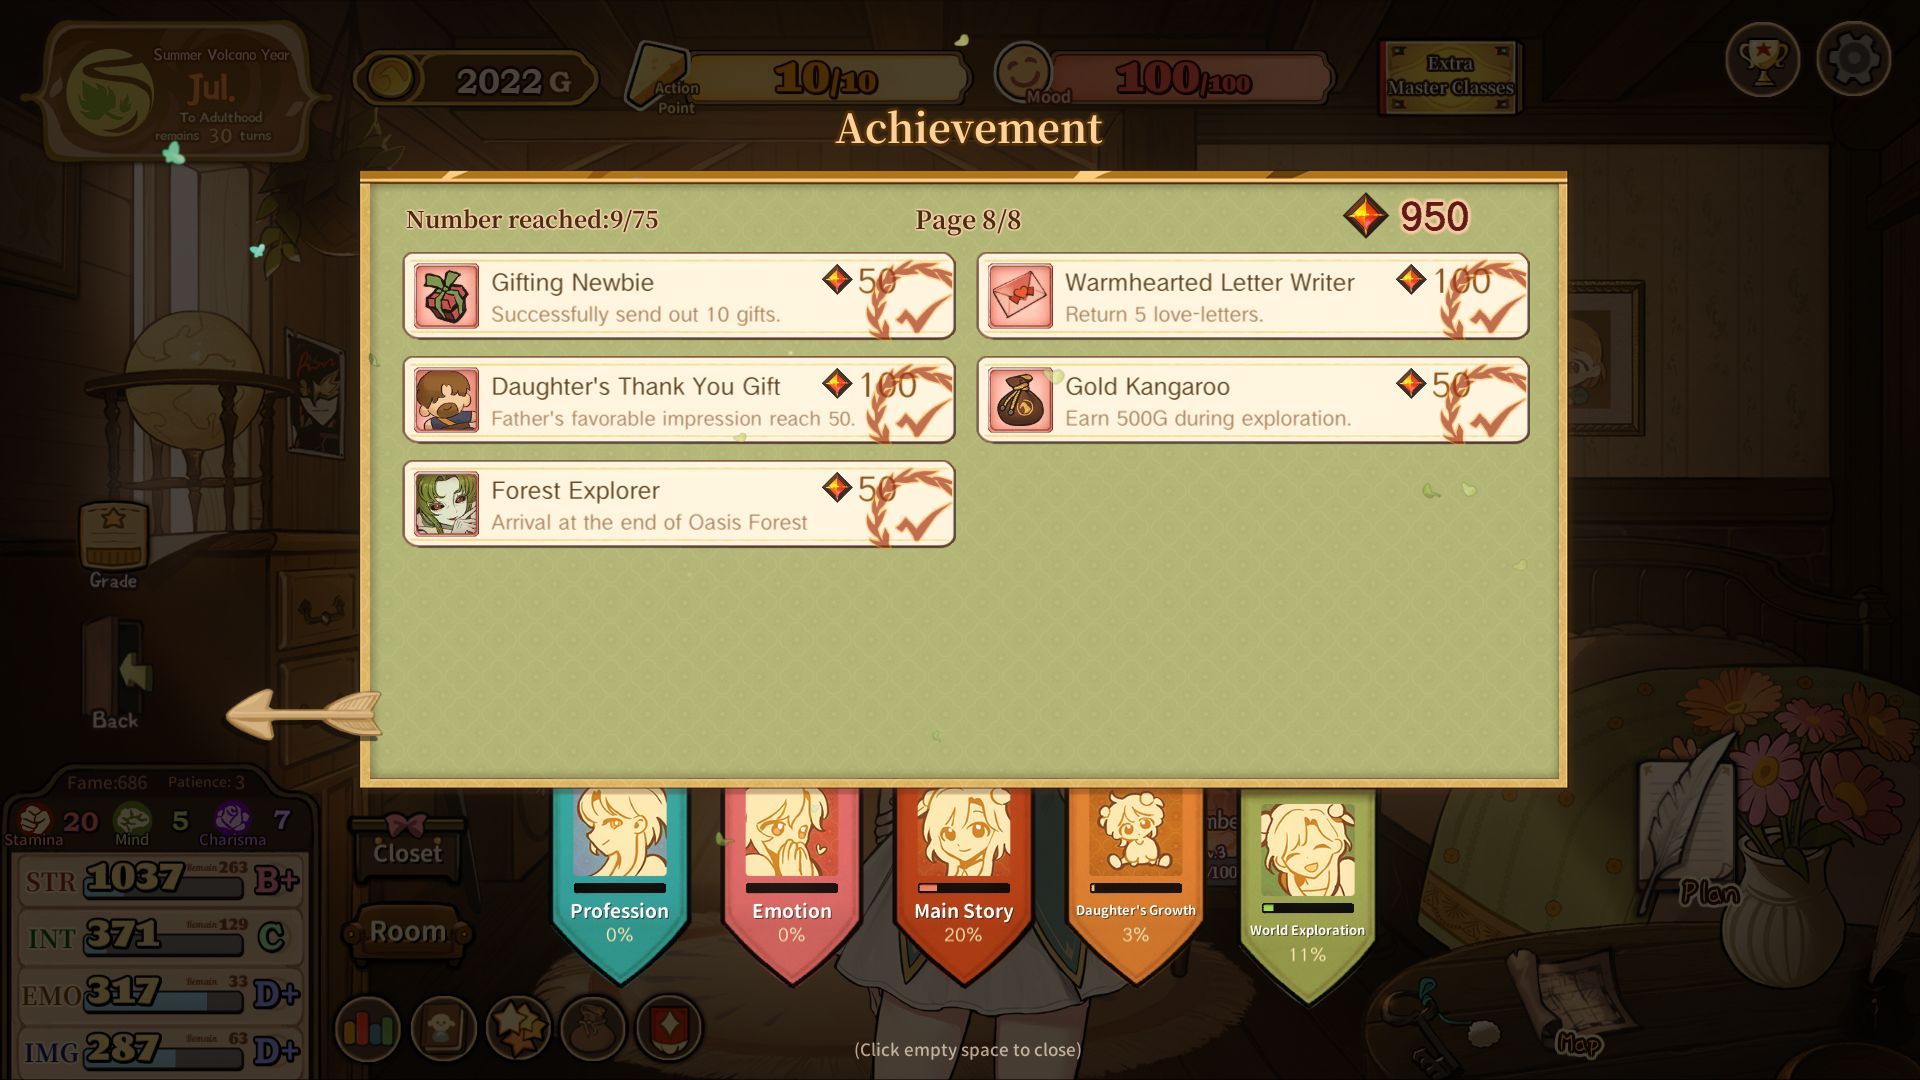 Achievements in Volcano Princess give upgrade points for future playthroughs